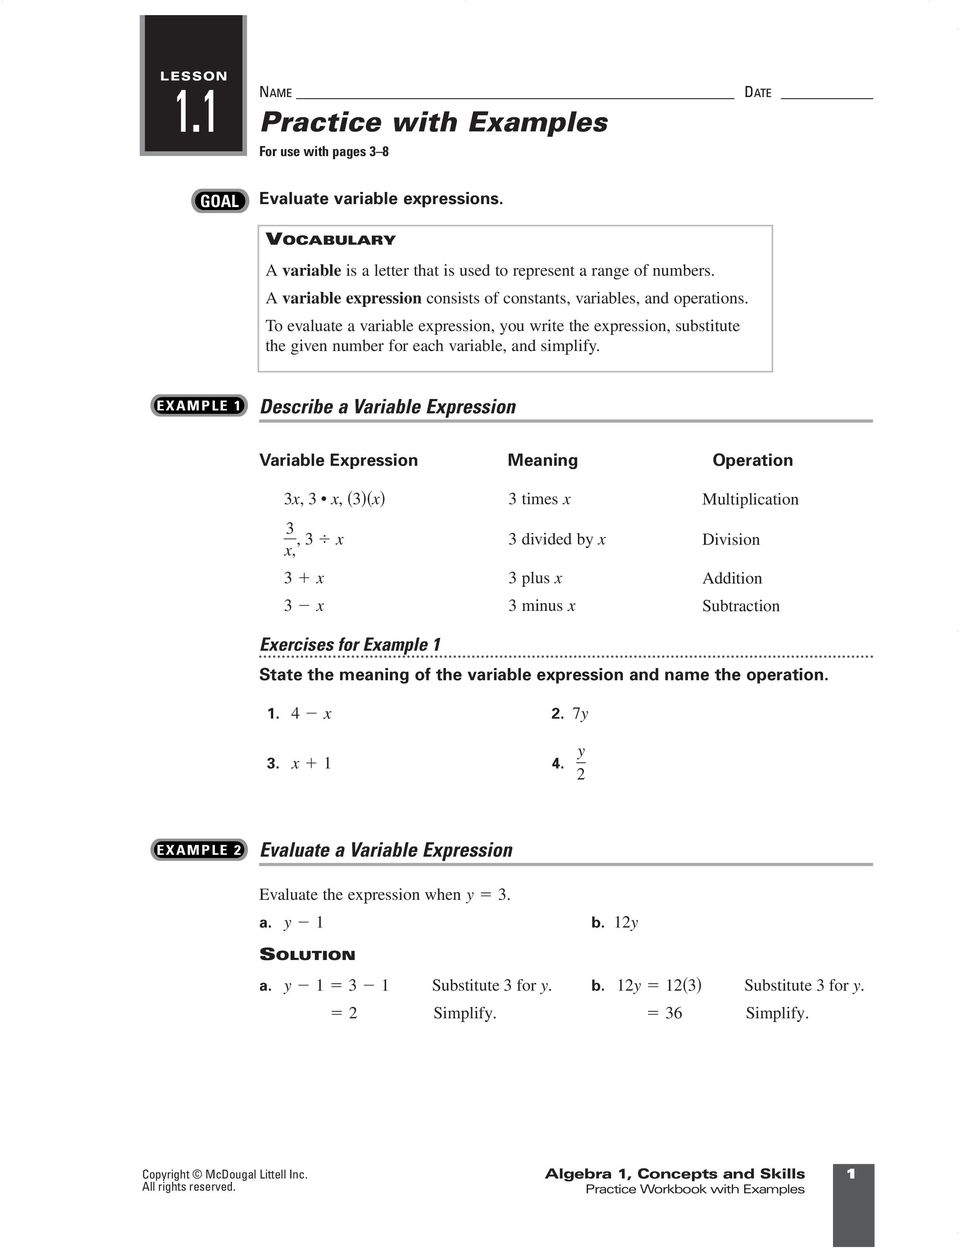 Algebra 1 common core regents course workbook answer key pdf Algebra 1 Practice Workbook With Examples Mcdougal Littell Concepts And Skills Pdf Free Download